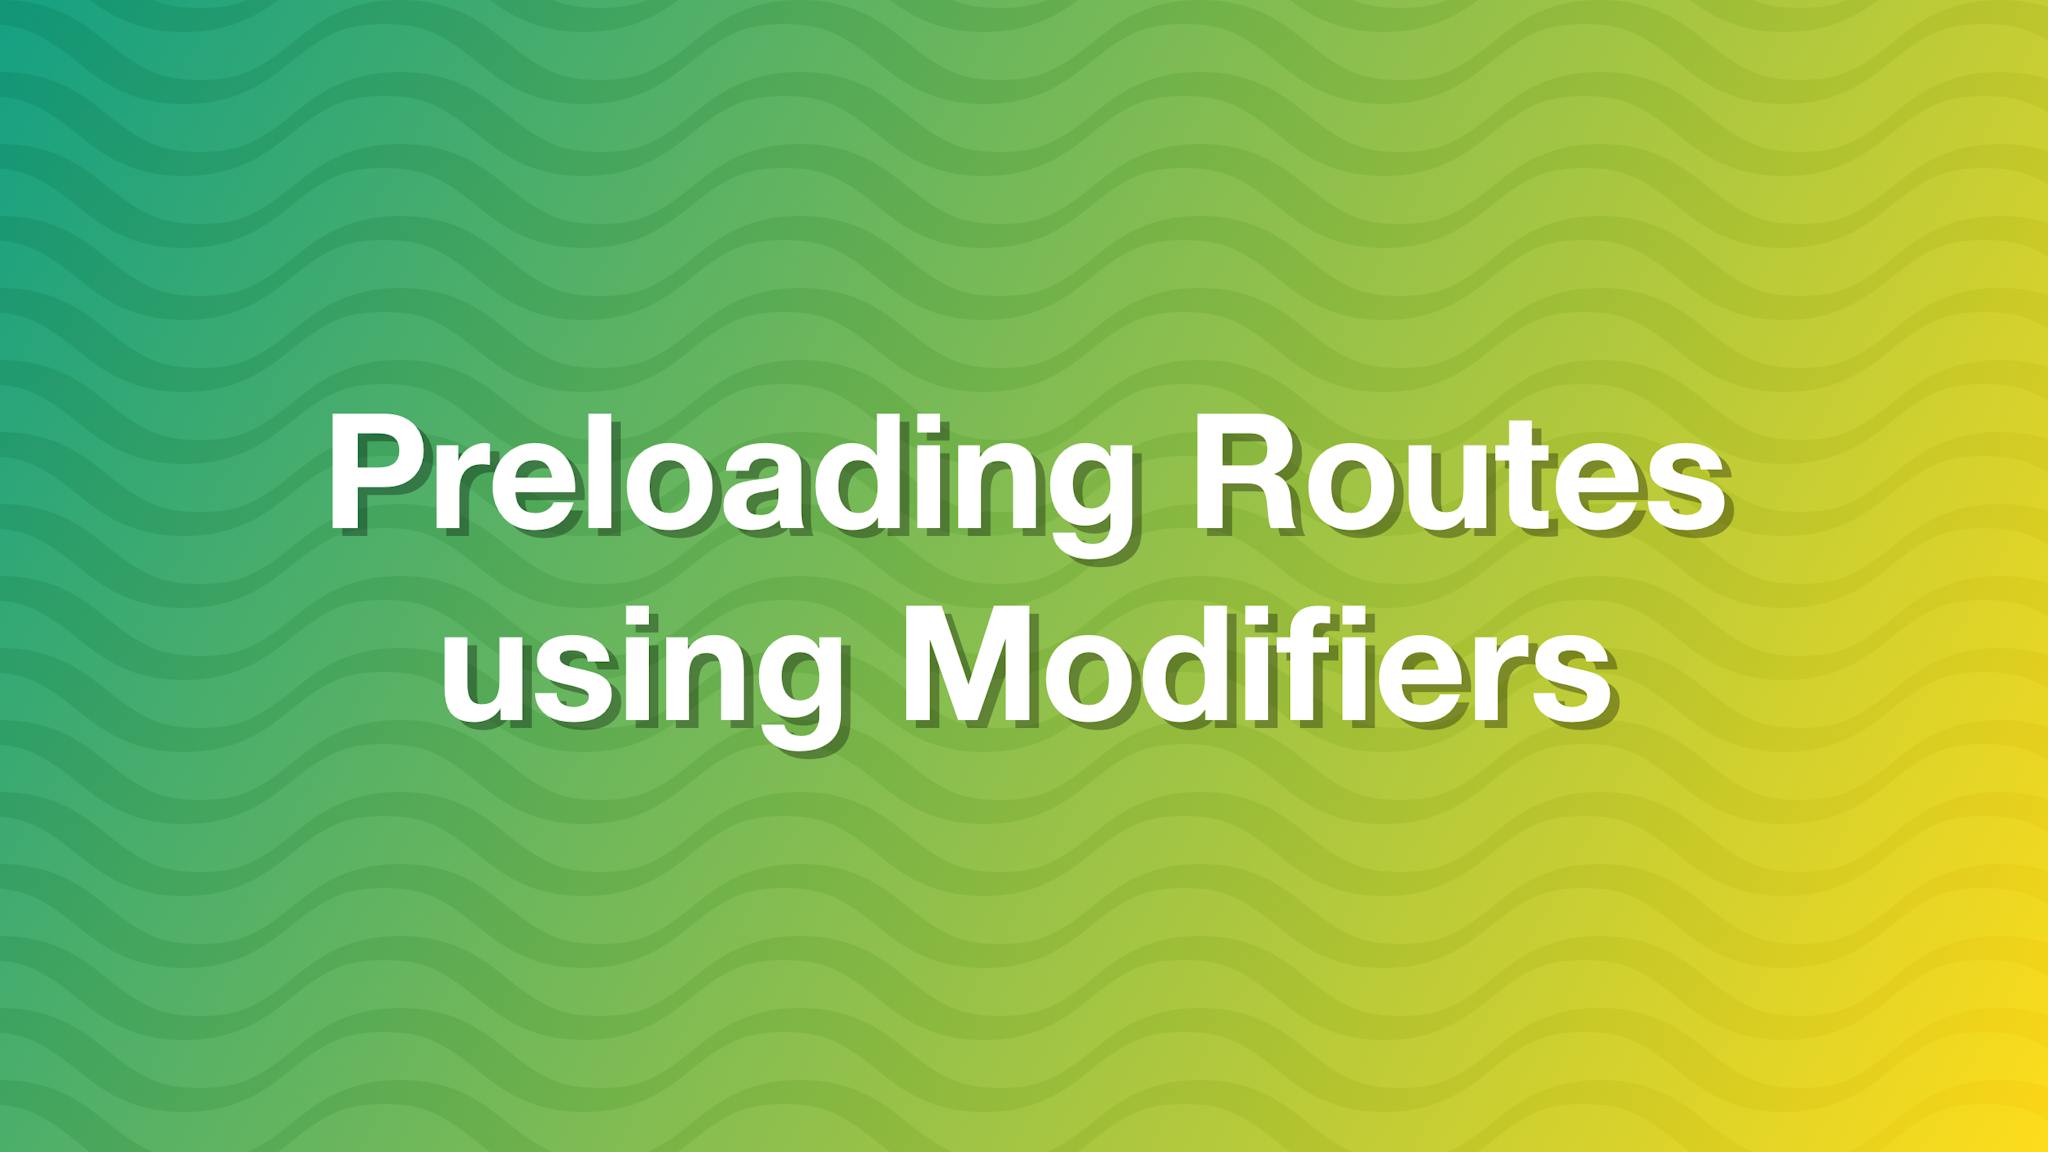 Preloading Routes using Modifiers